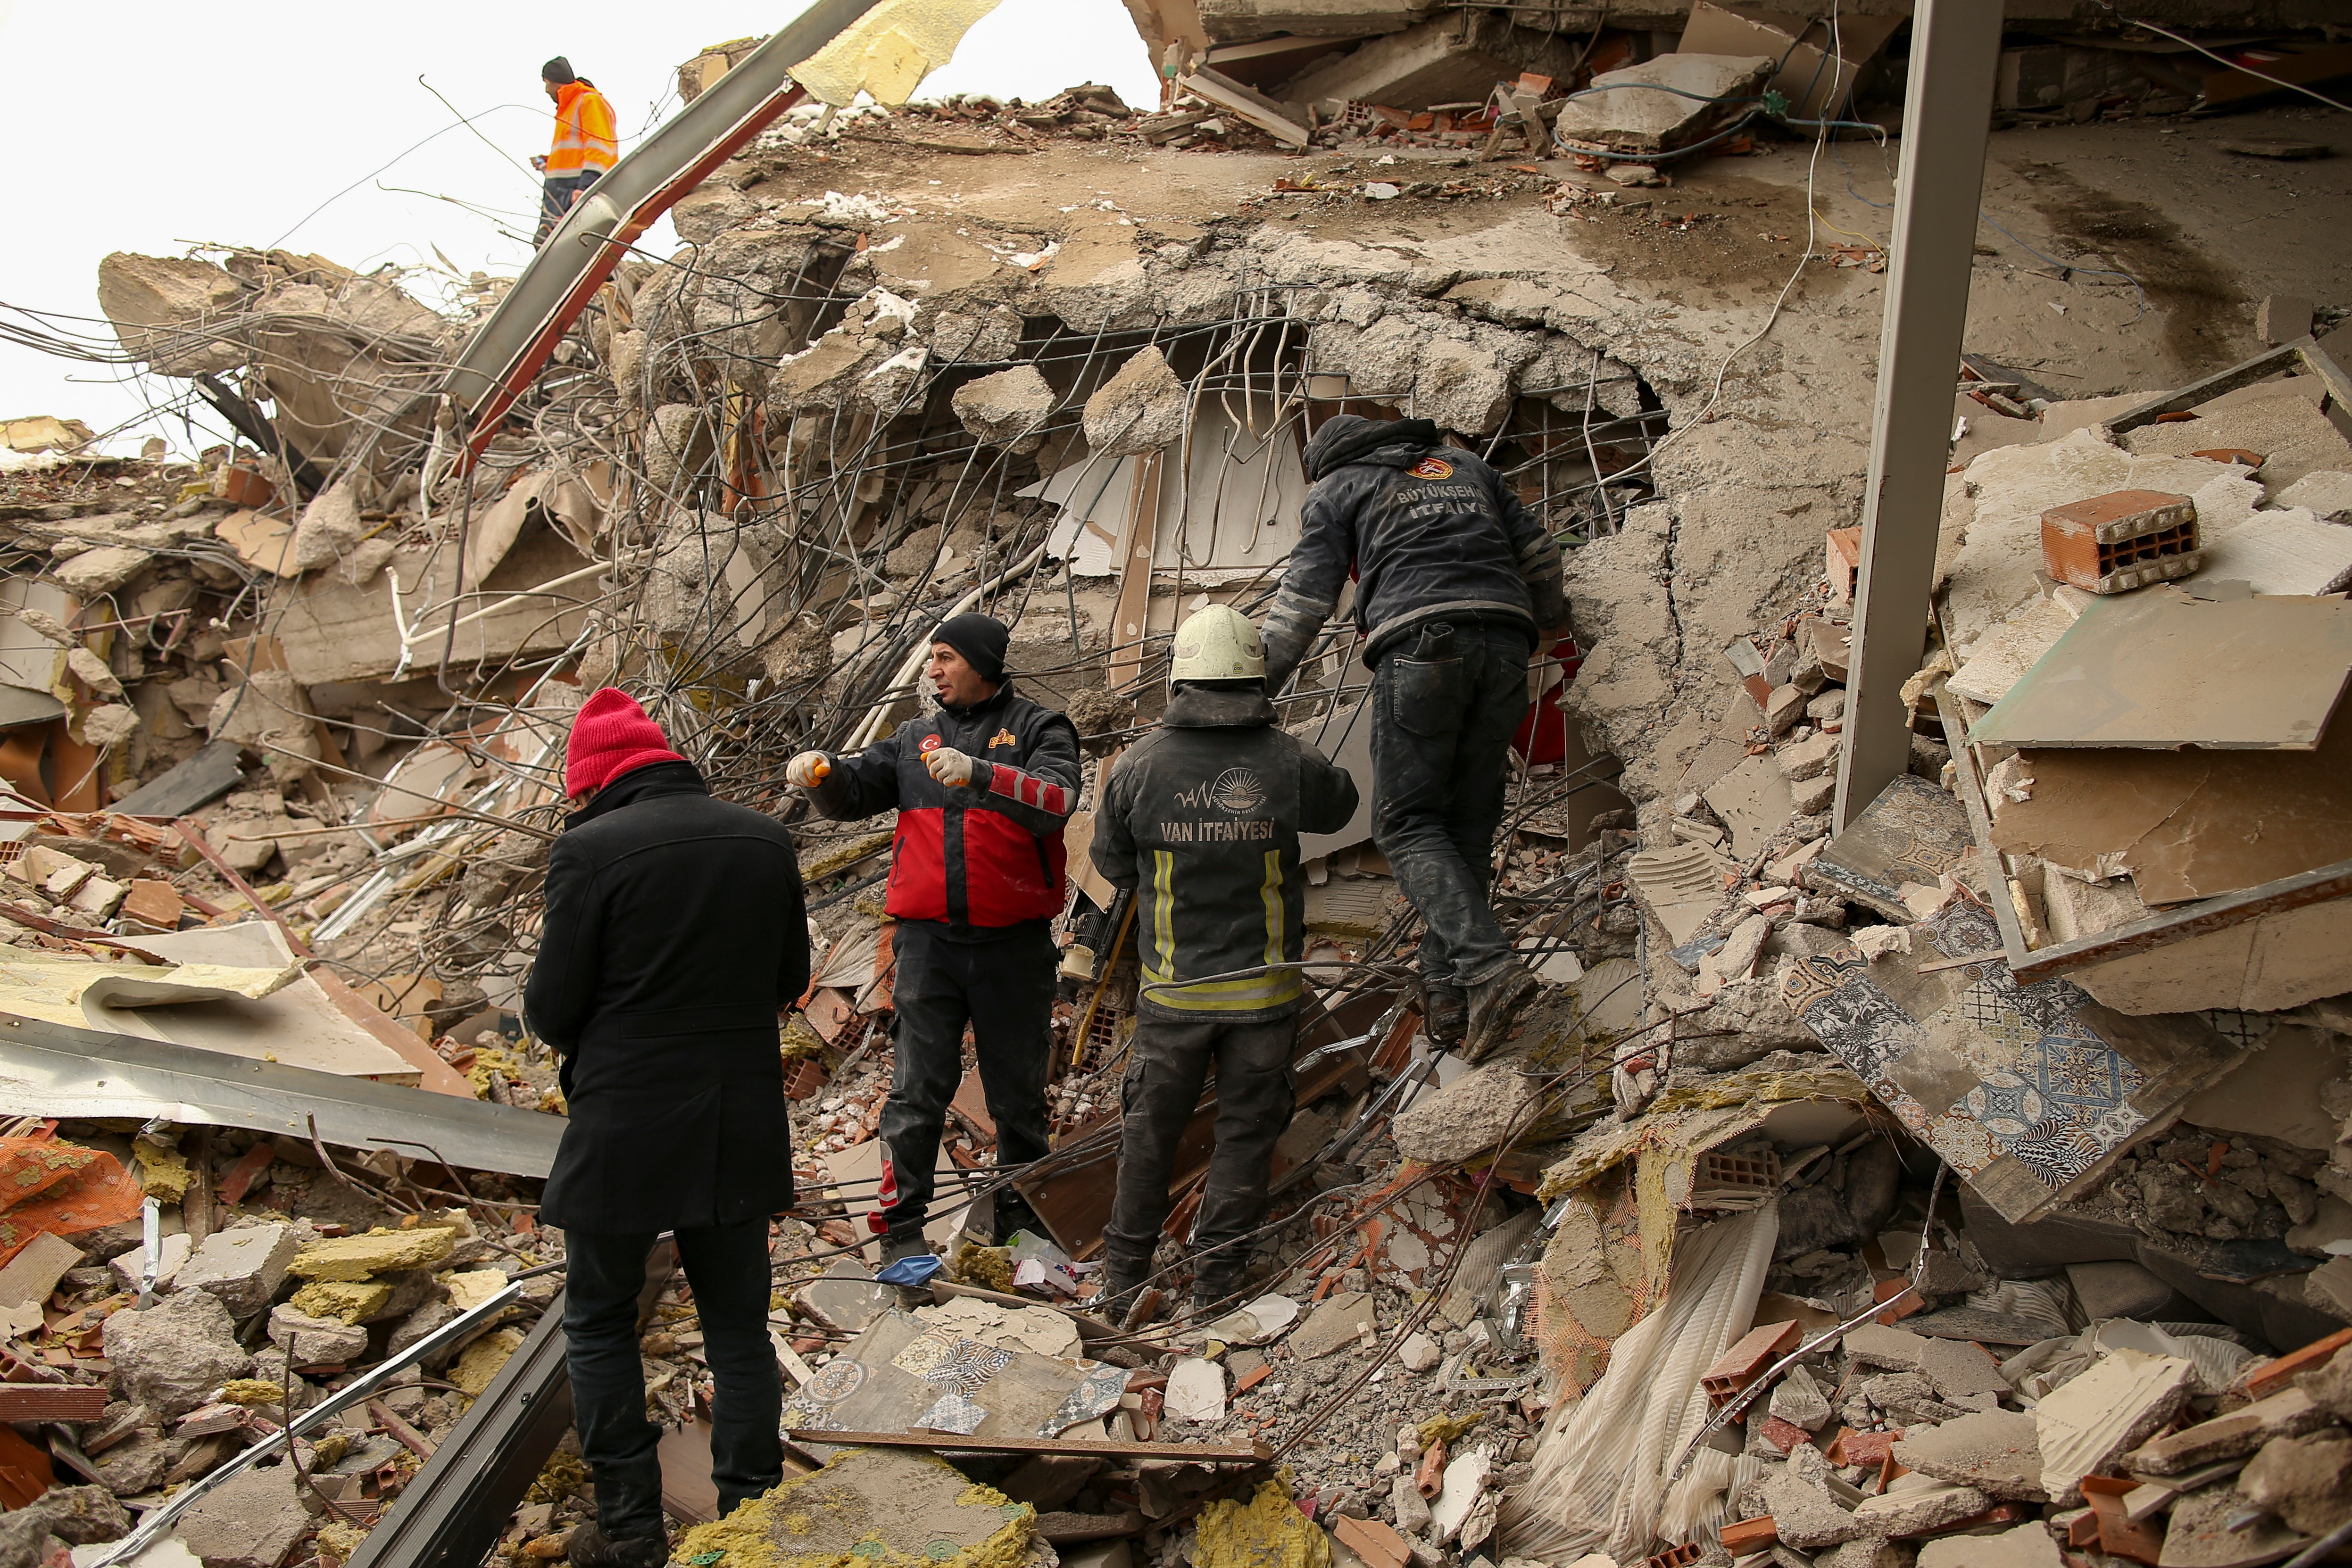 Rescue workers search for survivors on a collapsed building in Malatya, Turkey, Tuesday, Feb. 7, 2023.